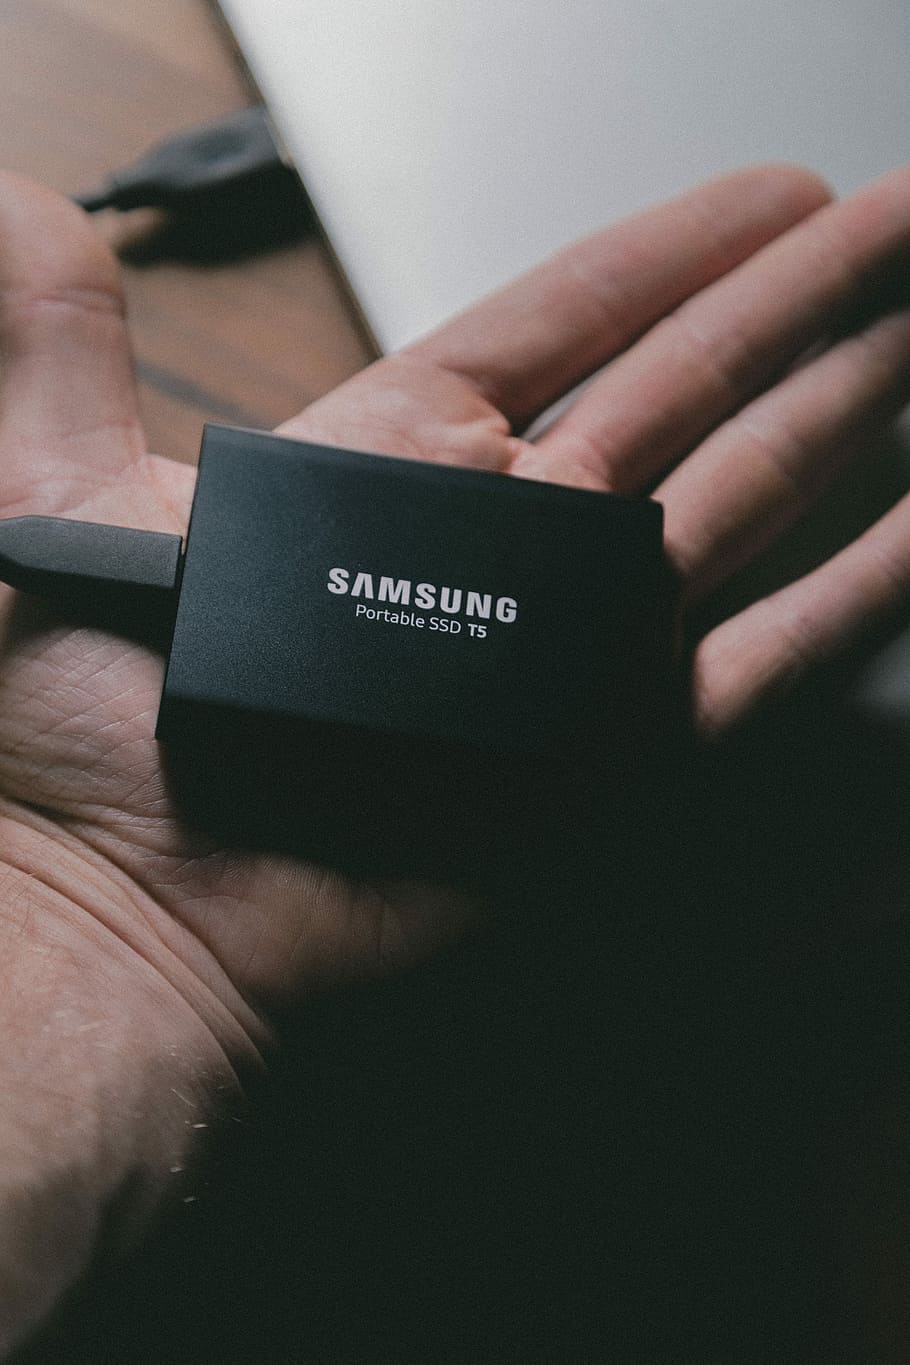 Samsung portable T5 SSD on person's hand, person holding Samsung Portable SSD TS adapter